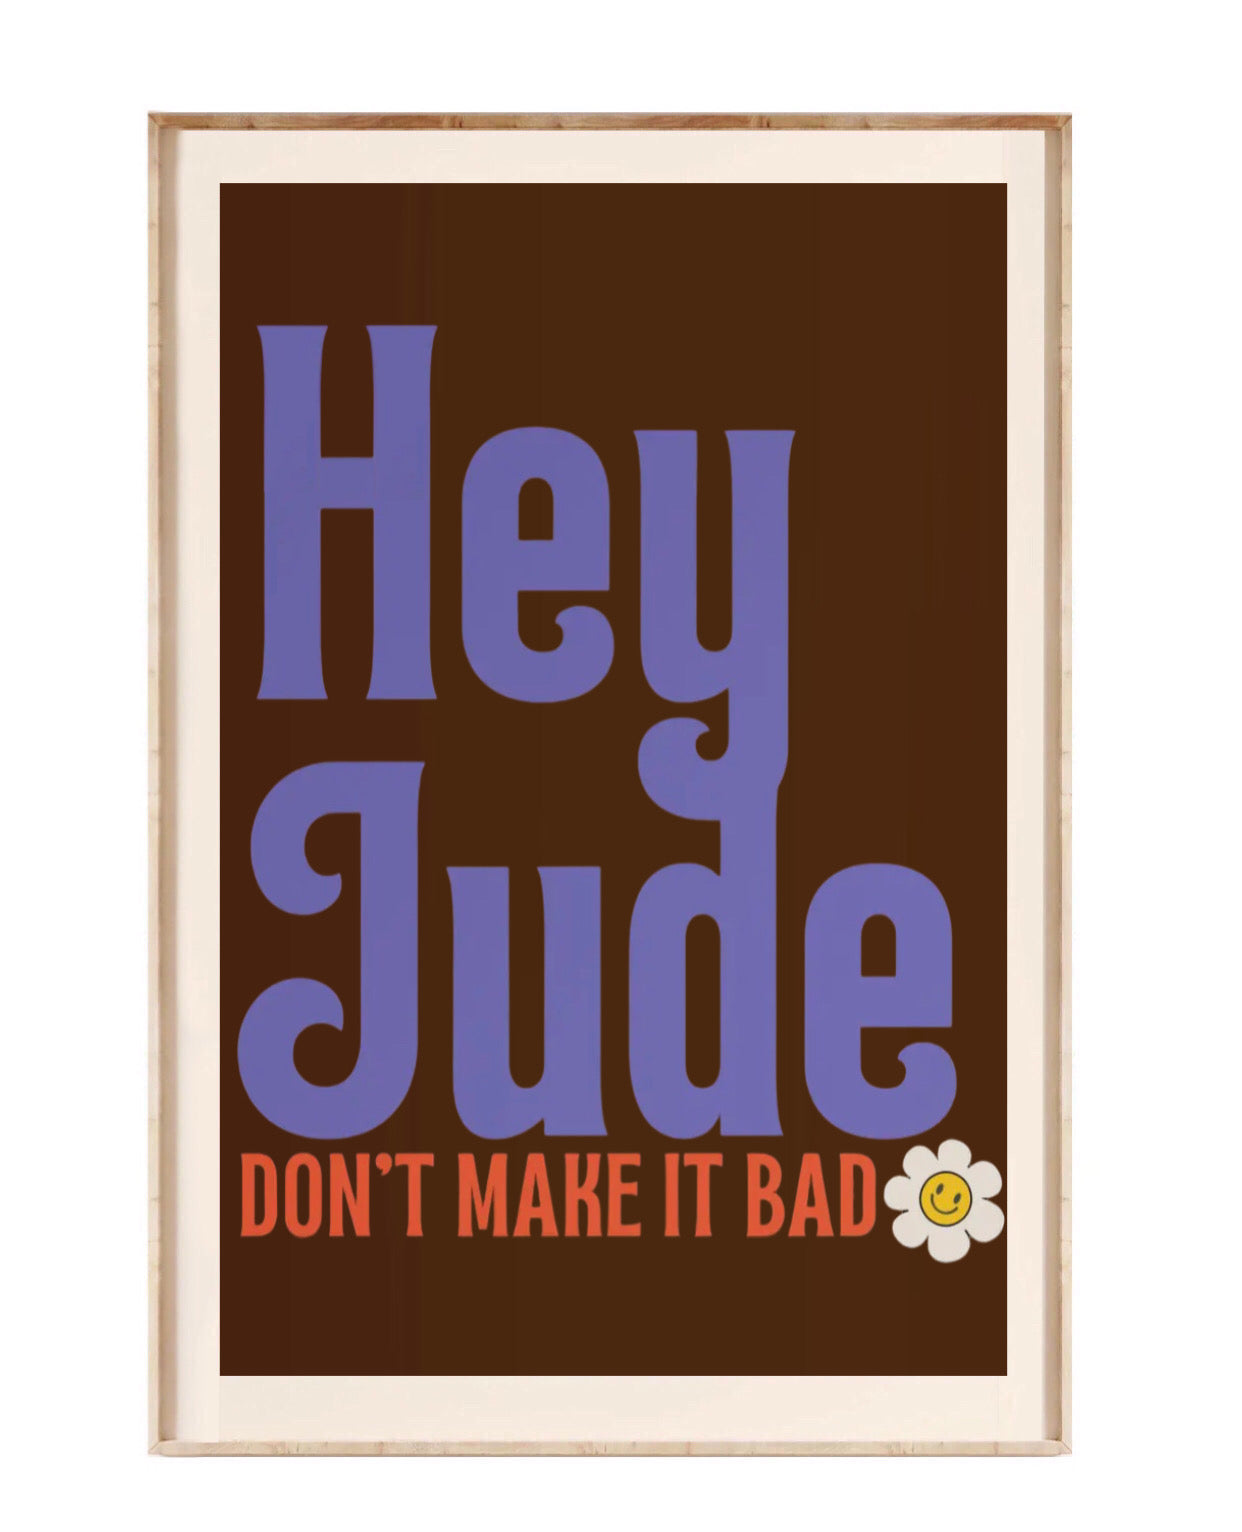 " hey jude don't make it bad" poster